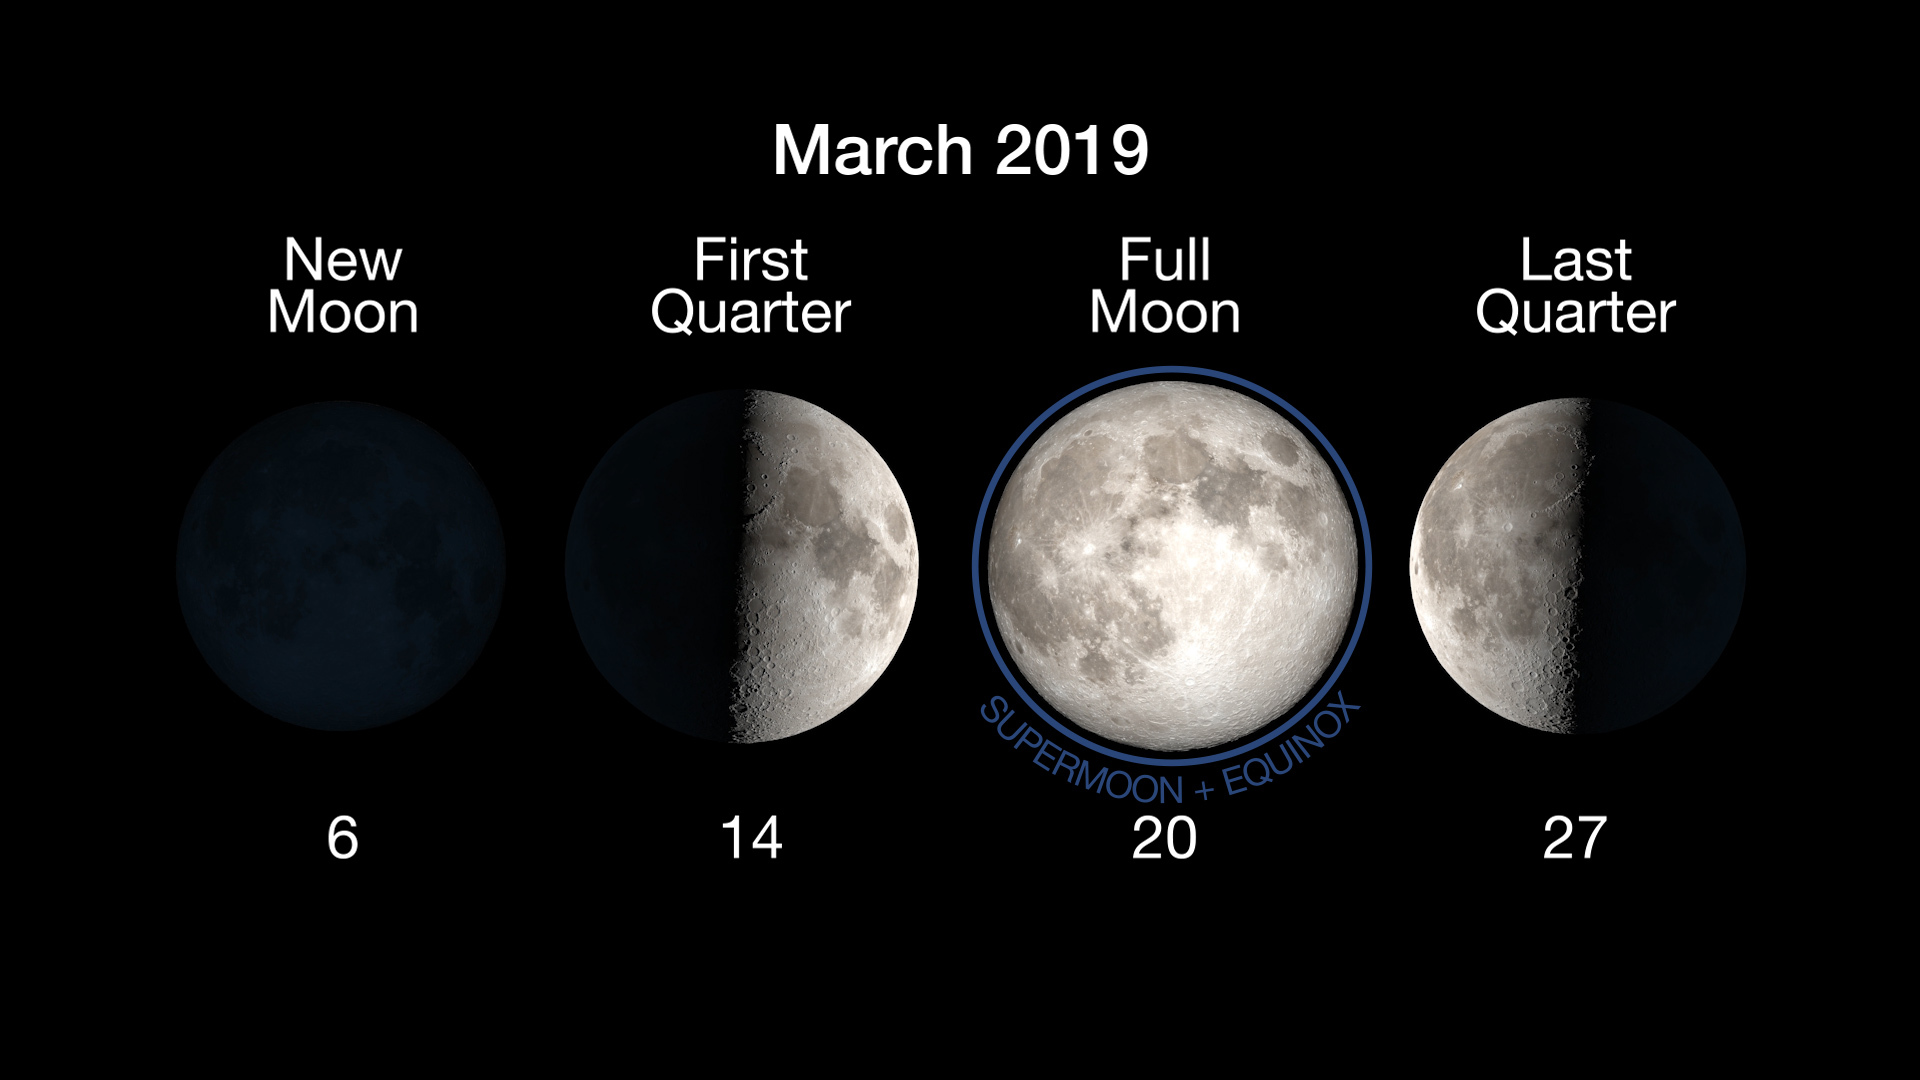 Moon phases. Full moon on March 20.